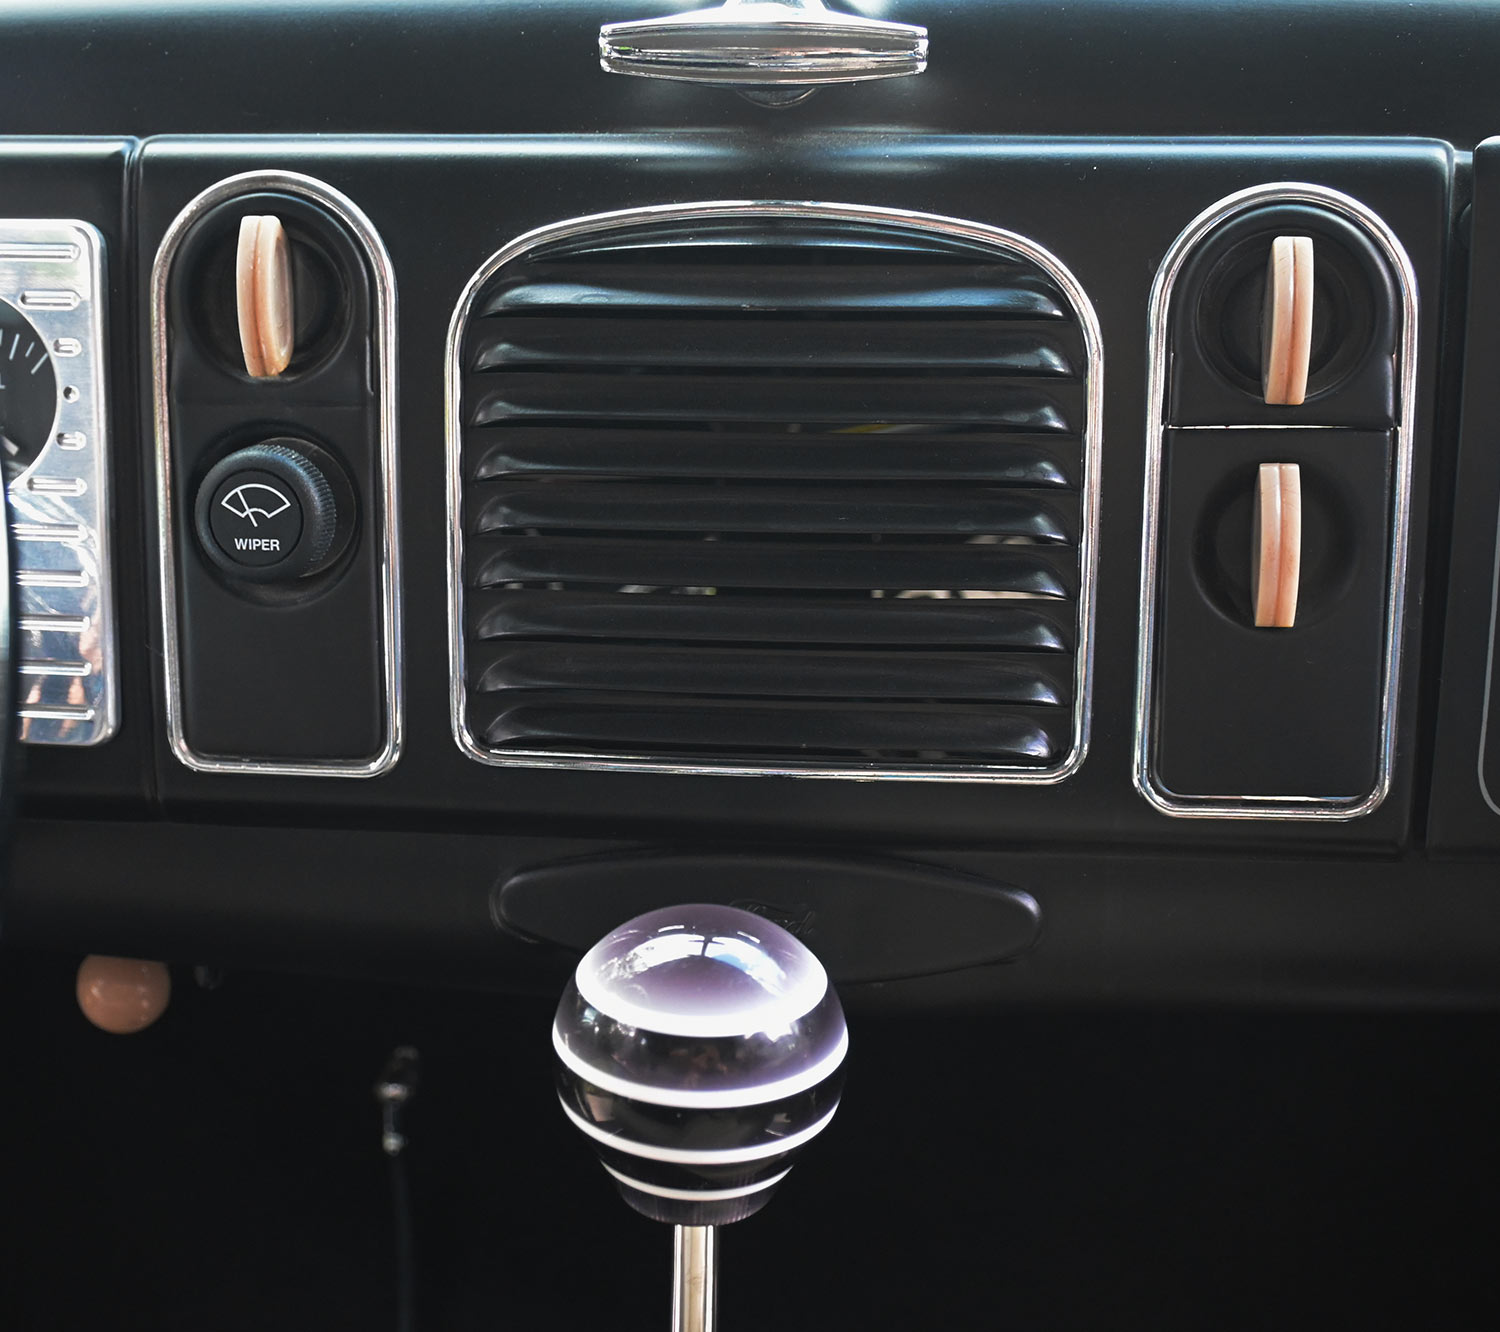 the ’38 Ford Standard Coupe's dashboard vents and gear stick knob